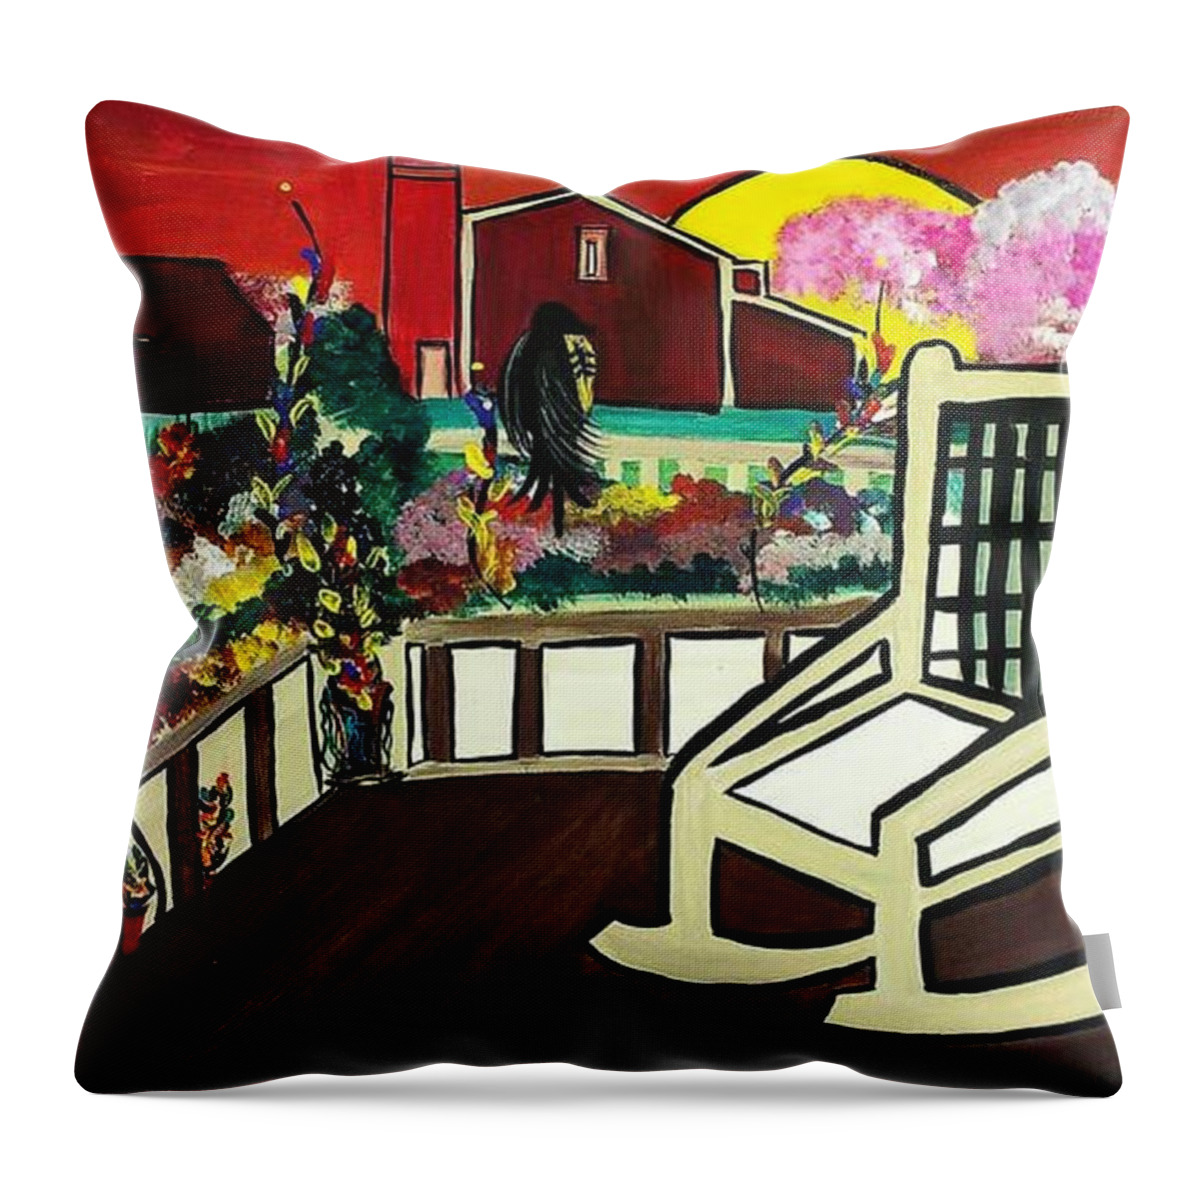 Farmhouse Throw Pillow featuring the painting Barnyard by Kelly M Turner